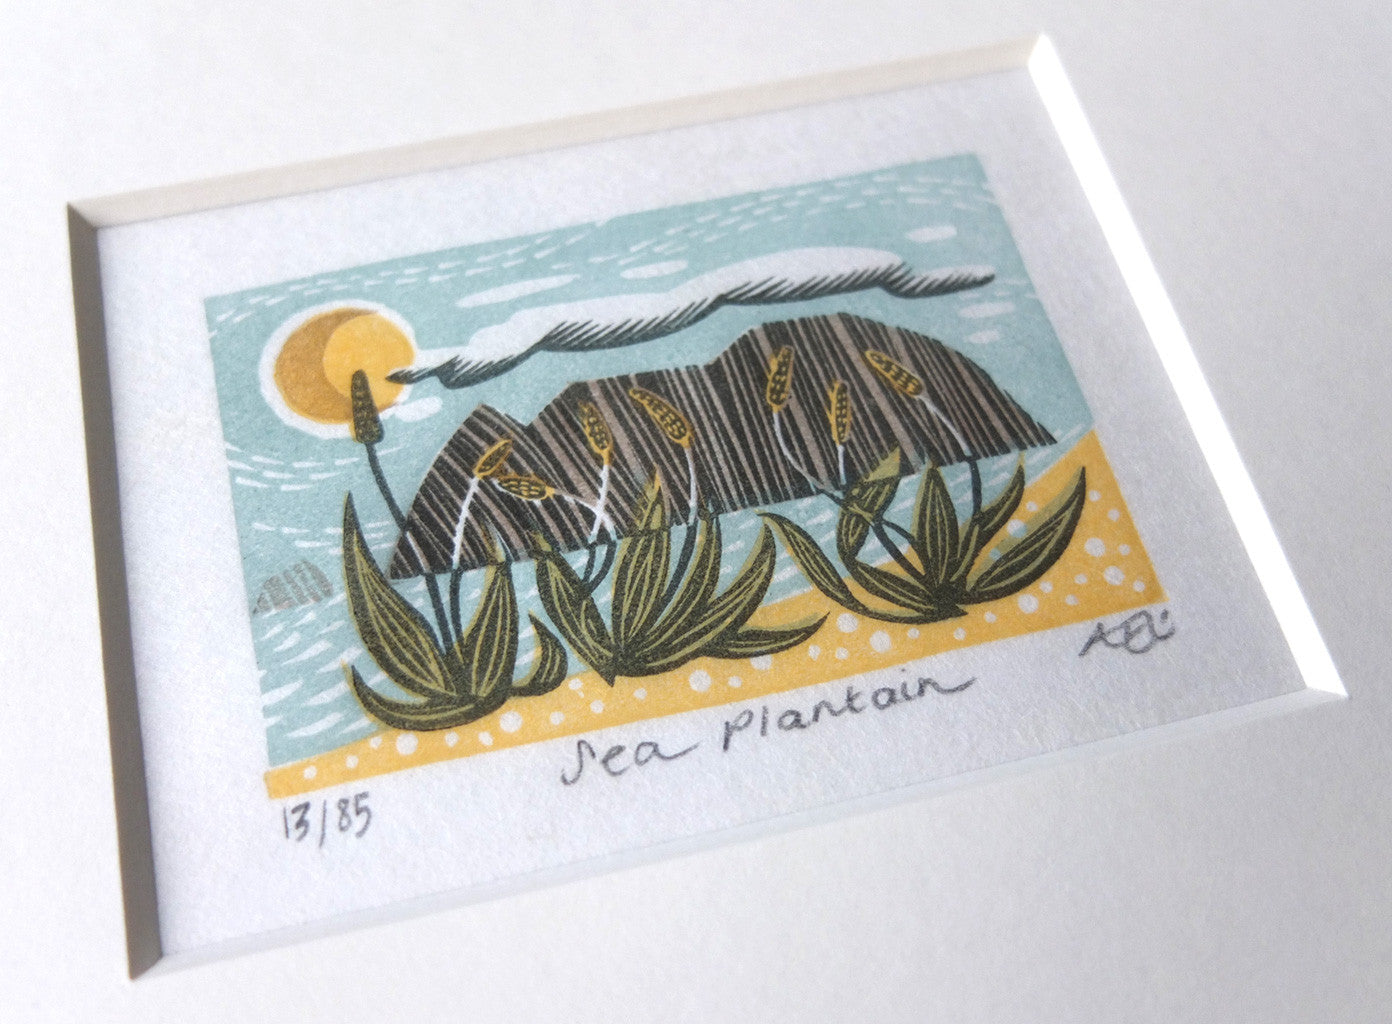 Sea Plantain - Angie Lewin - St. Jude's Prints